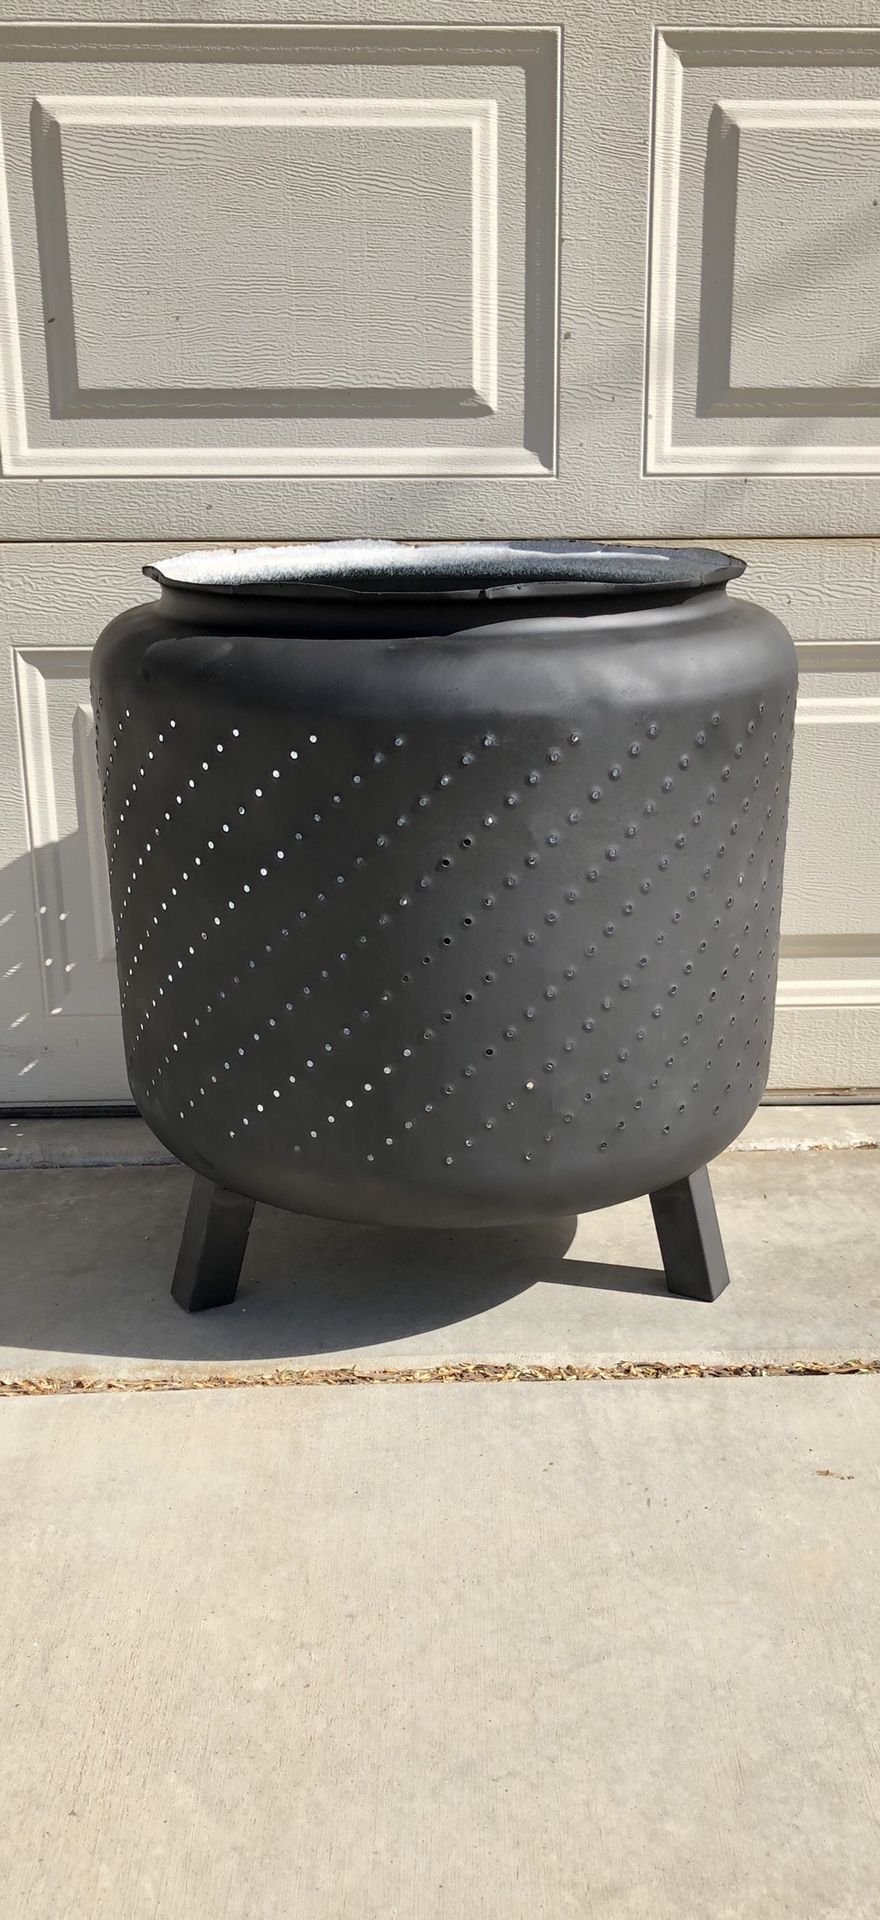 Fire Pit made from Washing Machine Tub with Legs